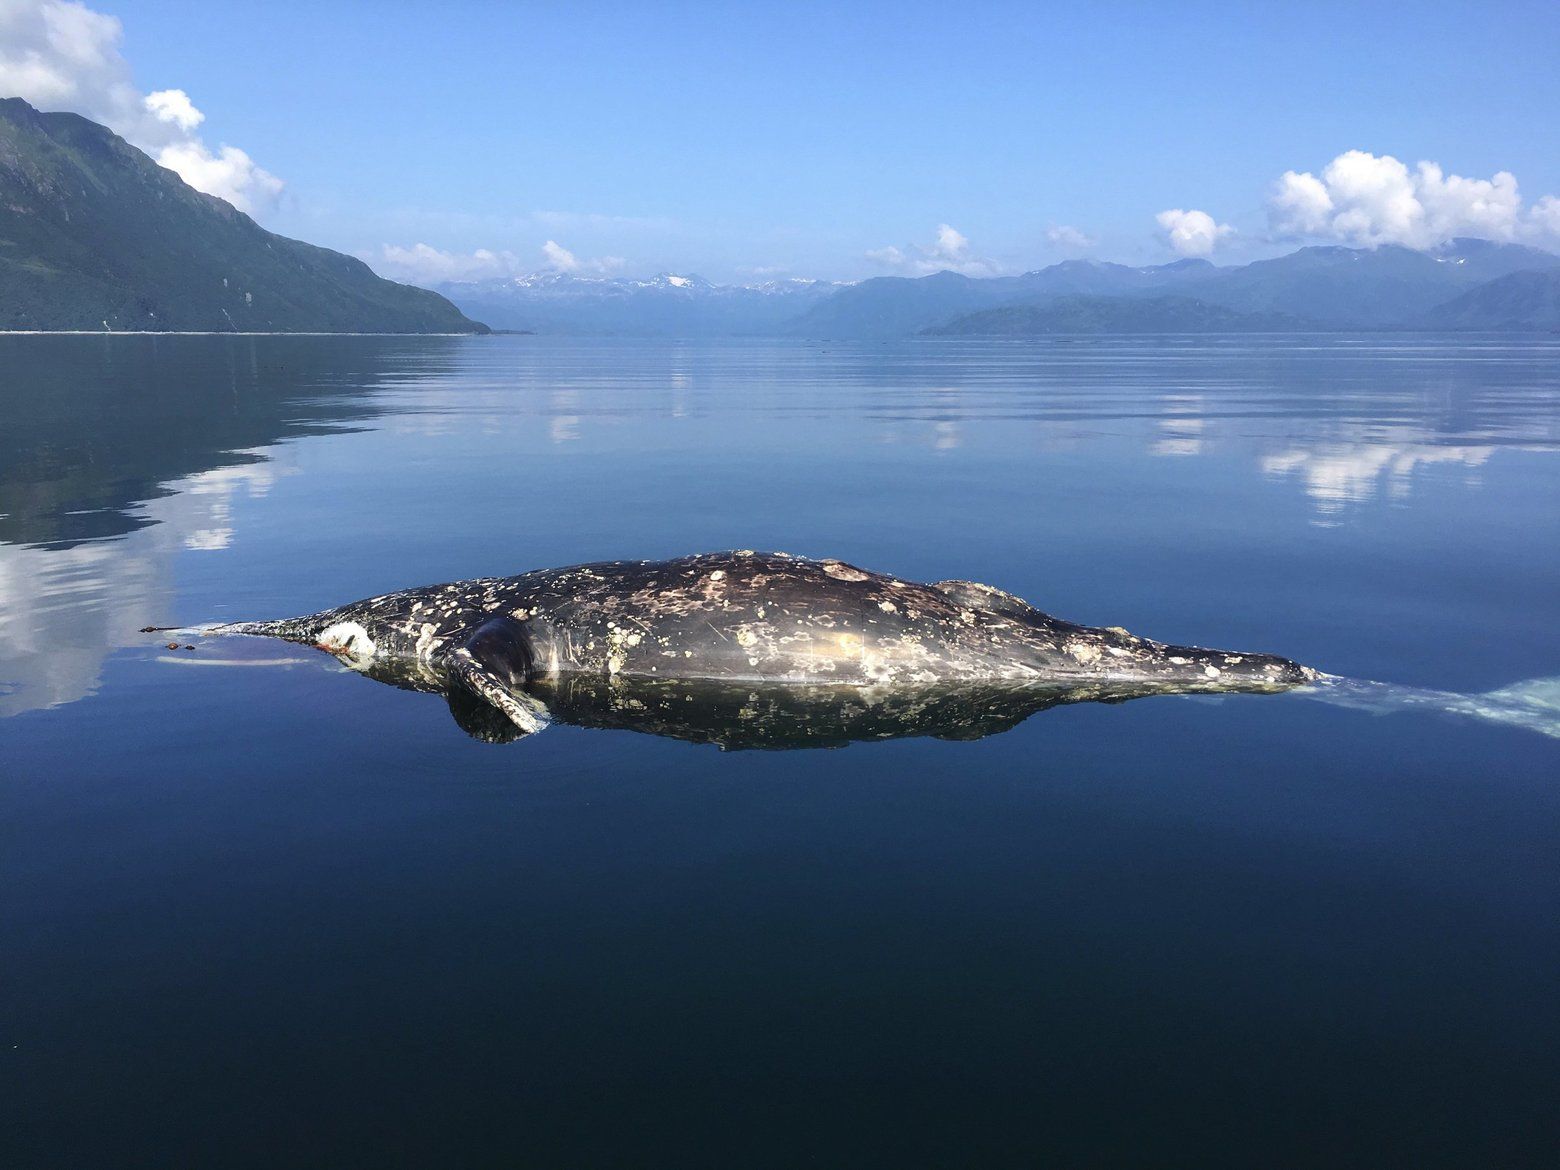 This gray whale died in July in Ugak Bay at Kodiak Island in Southwest Alaska, one of 179 reported deaths during the annual migration from Mexico to summer feeding grounds in the Bering Strait region. Image by Severin Reed. United States, 2019.